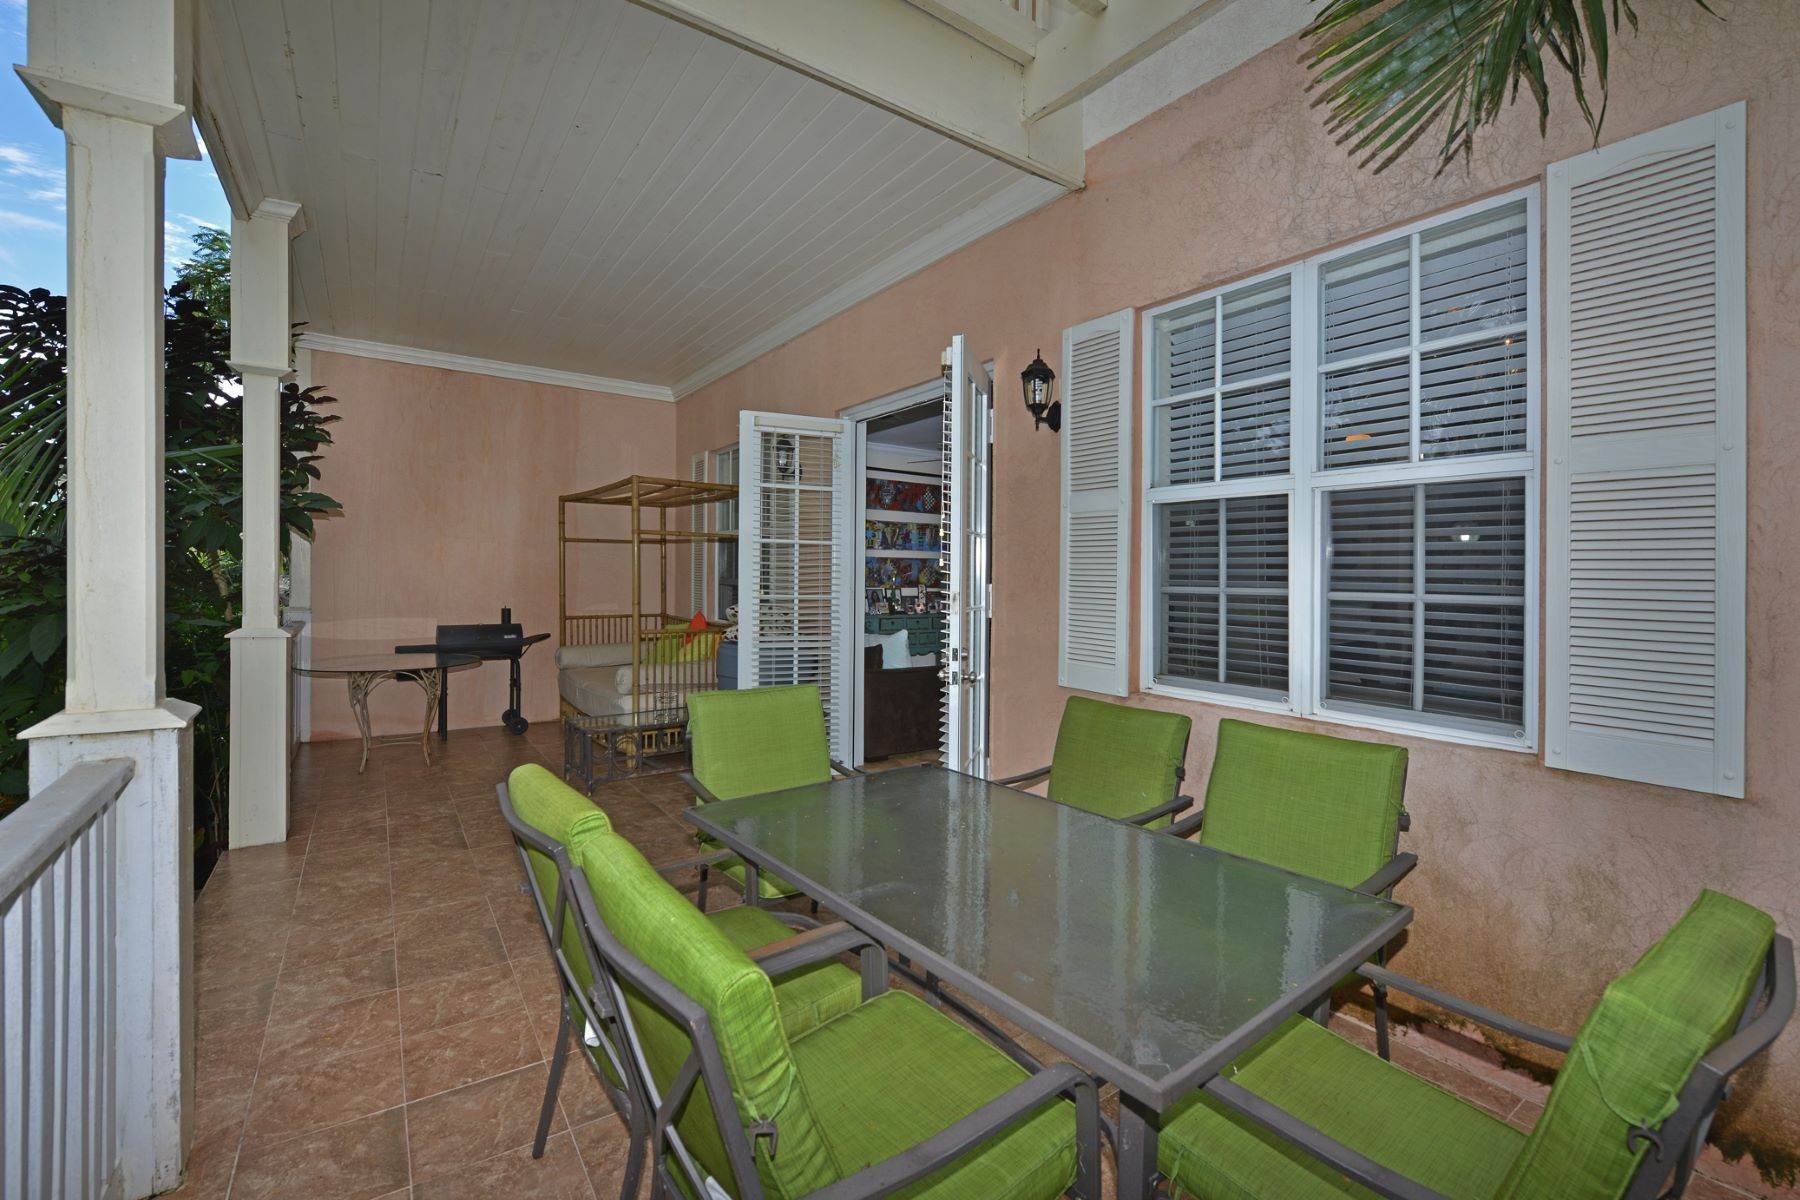 3. Townhouse for Sale at Balmoral GR79 Other Bahamas, Other Areas In The Bahamas, Bahamas